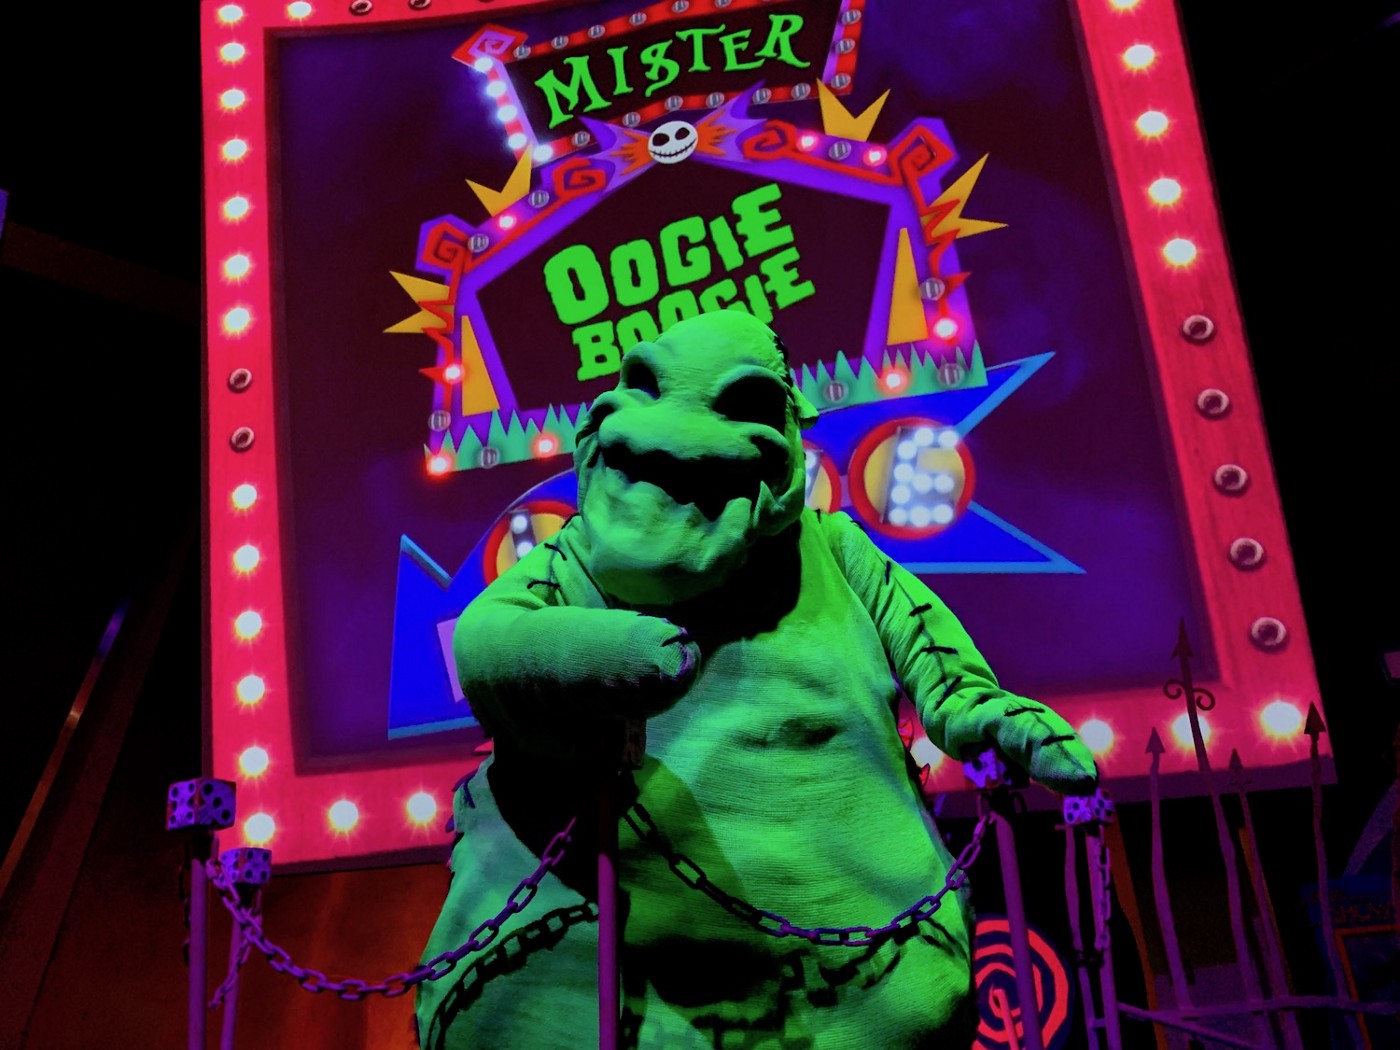 Is Oogie Boogie Bash 2021 Canceled at Disneyland? - Magic Guidebooks